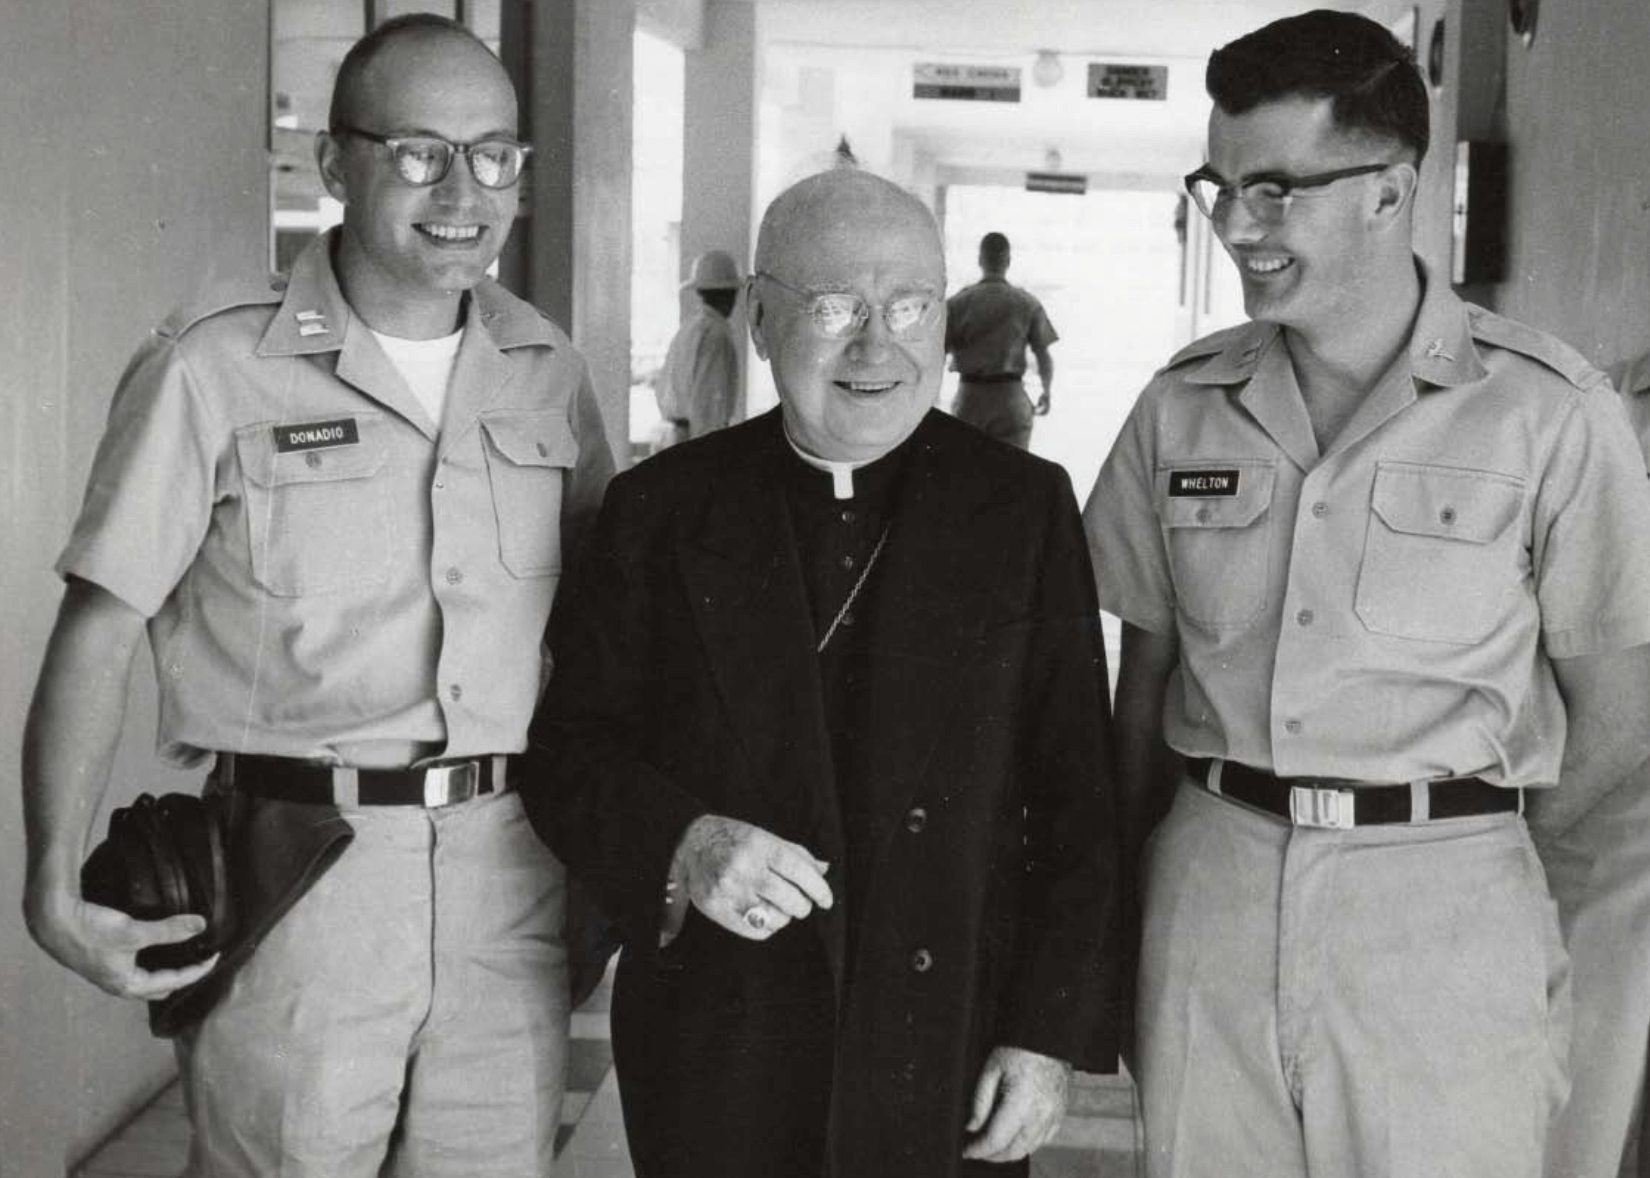 Black and white photo of Drs. Donadio and Whelton in uniform with Cardinal Spellman